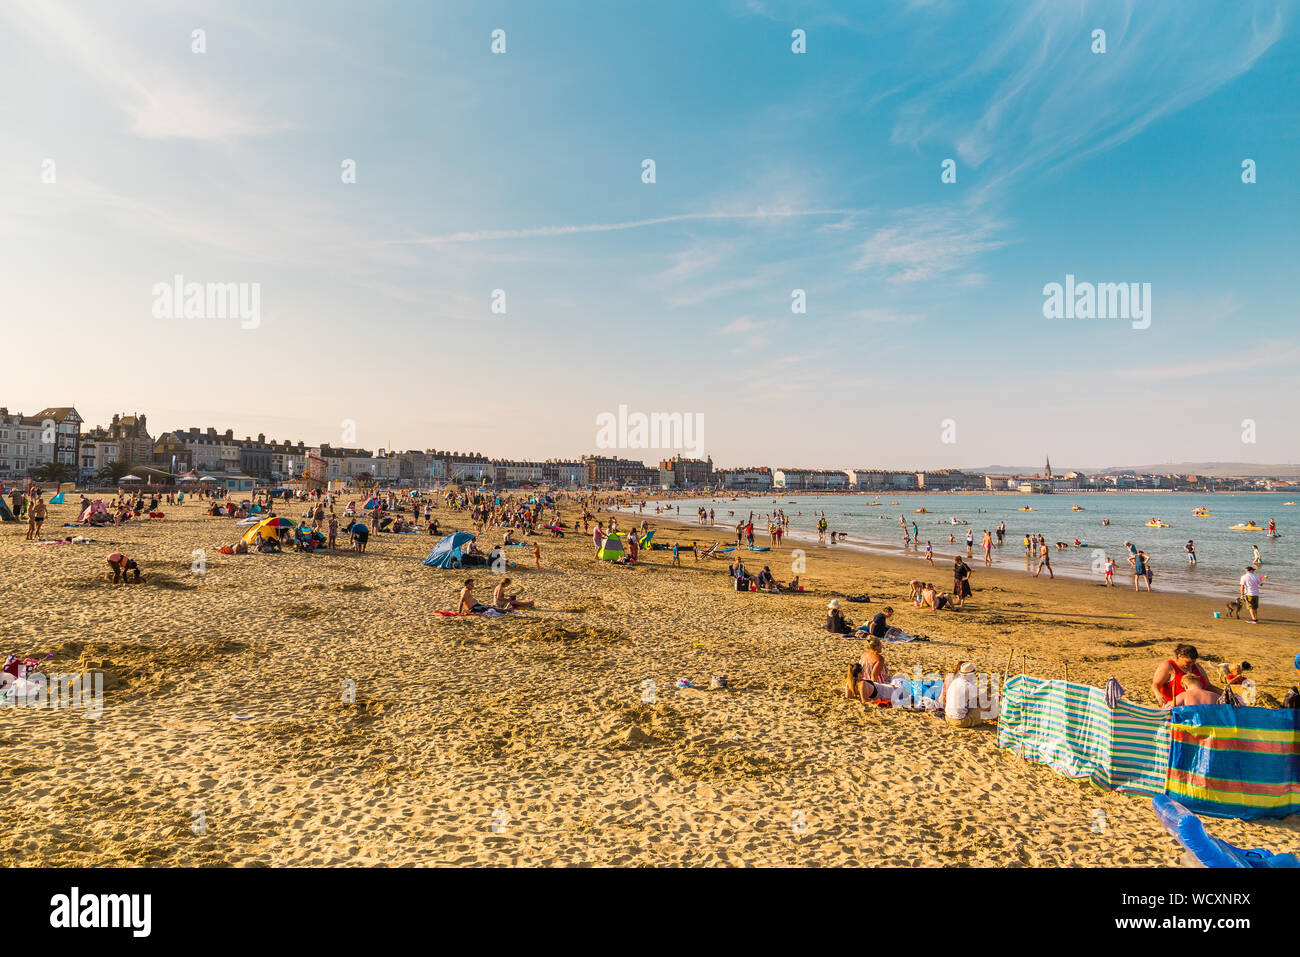 Holidaymakers on the Sand beach at Weymouth Beach for Summer, Dorset, England, UK Stock Photo